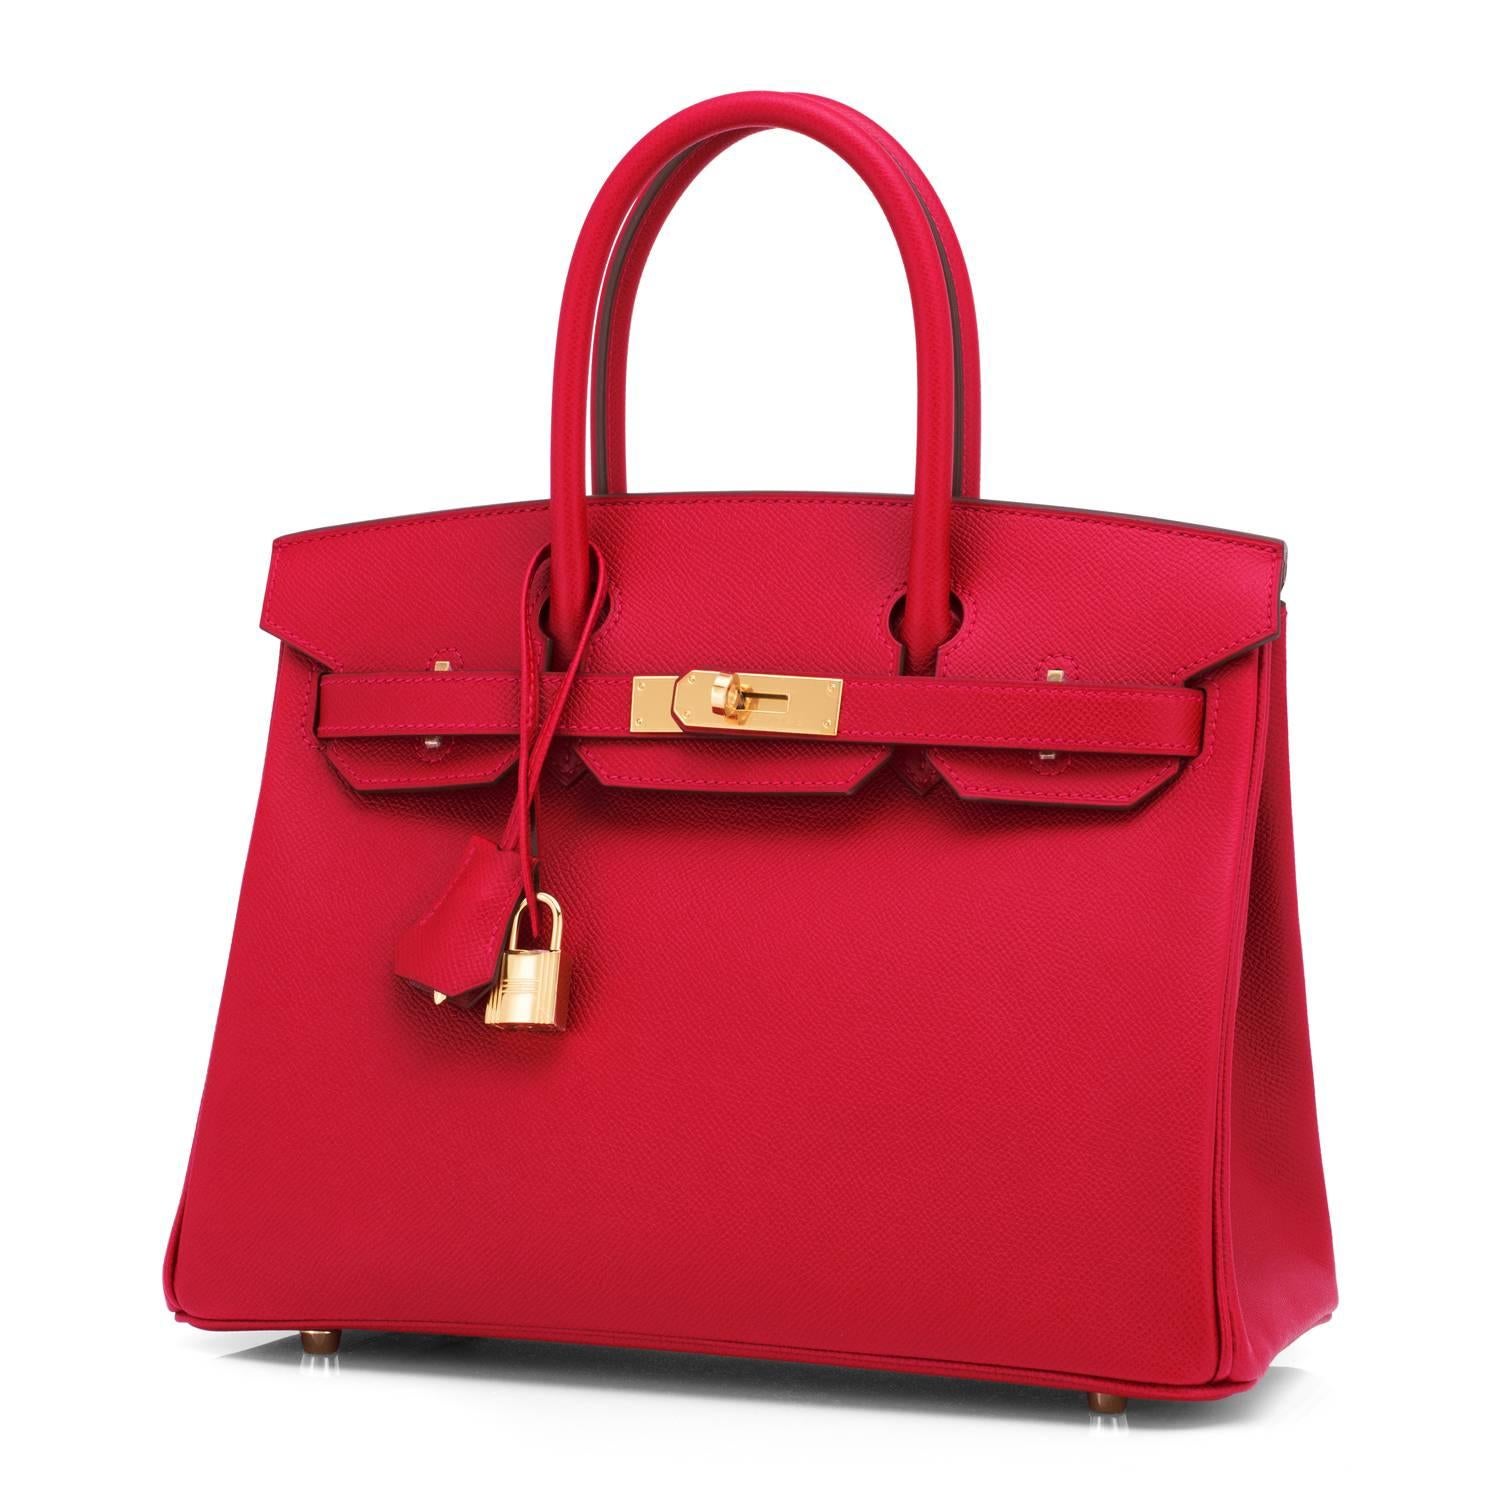 Hermes Rouge Casaque 30cm Birkin Lipstick Red Epsom Gold Hardware
Just purchased from store; bag bears new 2018 interior C stamp.
Brand New in Box. Store fresh. Pristine condition (with plastic on hardware).
Perfect gift! Coming full set with keys,